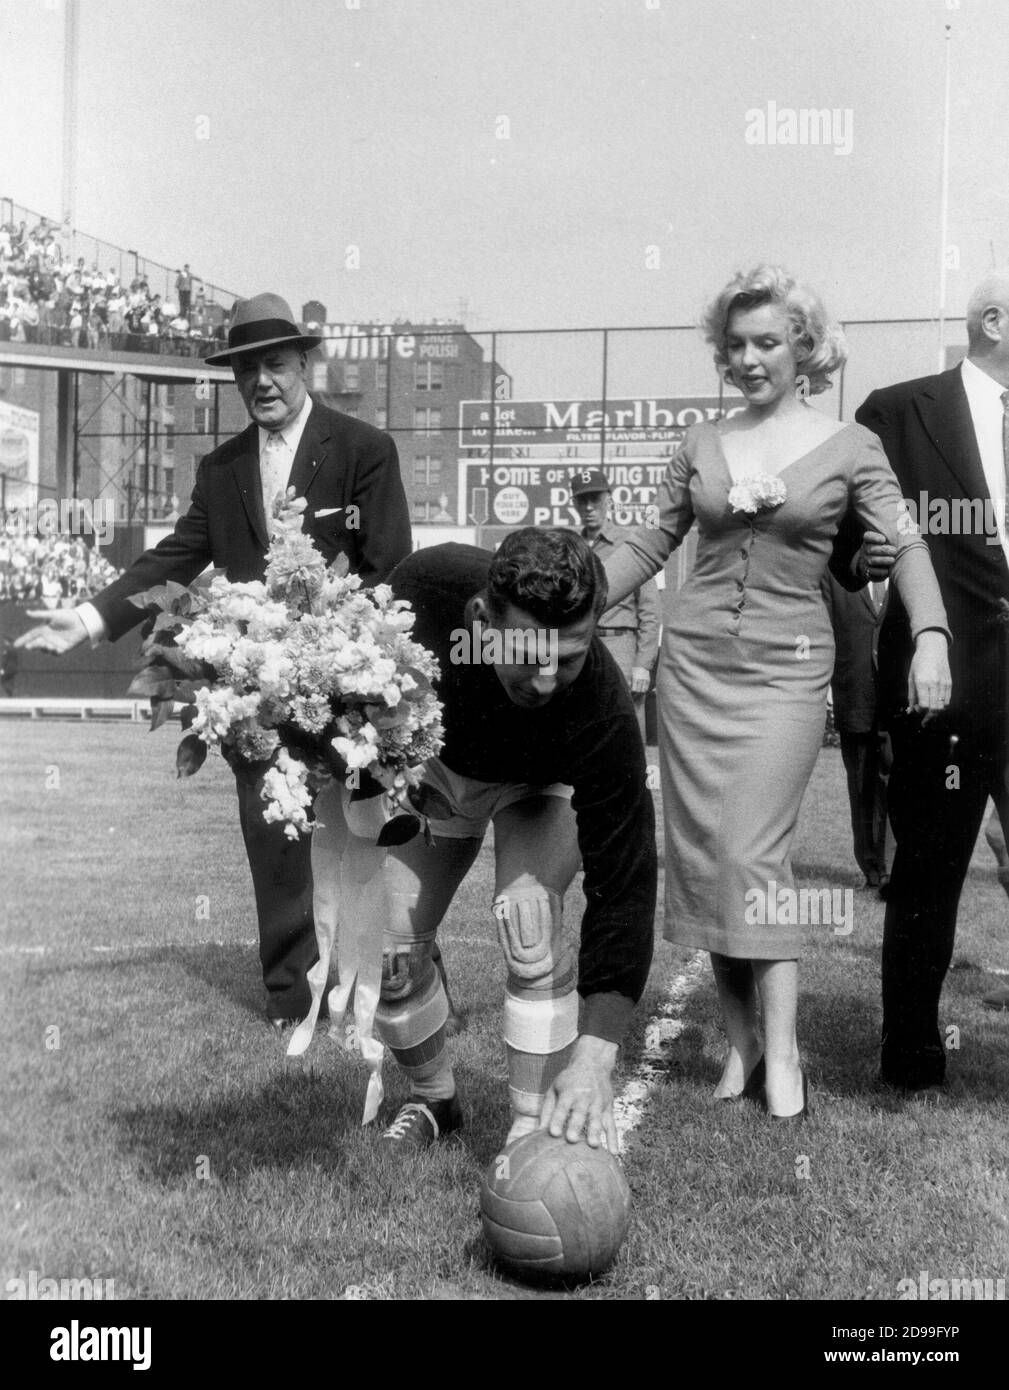 12 may  1957 , New York : The movie actress MARILYN  MONROE ( 1926 - 1962 ) opened an all-star soccer match  ( Israel - America   ) that took place at Ebbet Field Stadium  in Brooklyn . Marilyn was Jewis after the marriage with Arthur Miller the 29 june 1956 .  Marilyn kicks with such force that she sprains two toes , but stay to award the trophy to the victorious Israelis , who claim her as a mascot - CALCIO - STADIO -- CINEMA - MOVIE ---  Archivio GBB Stock Photo